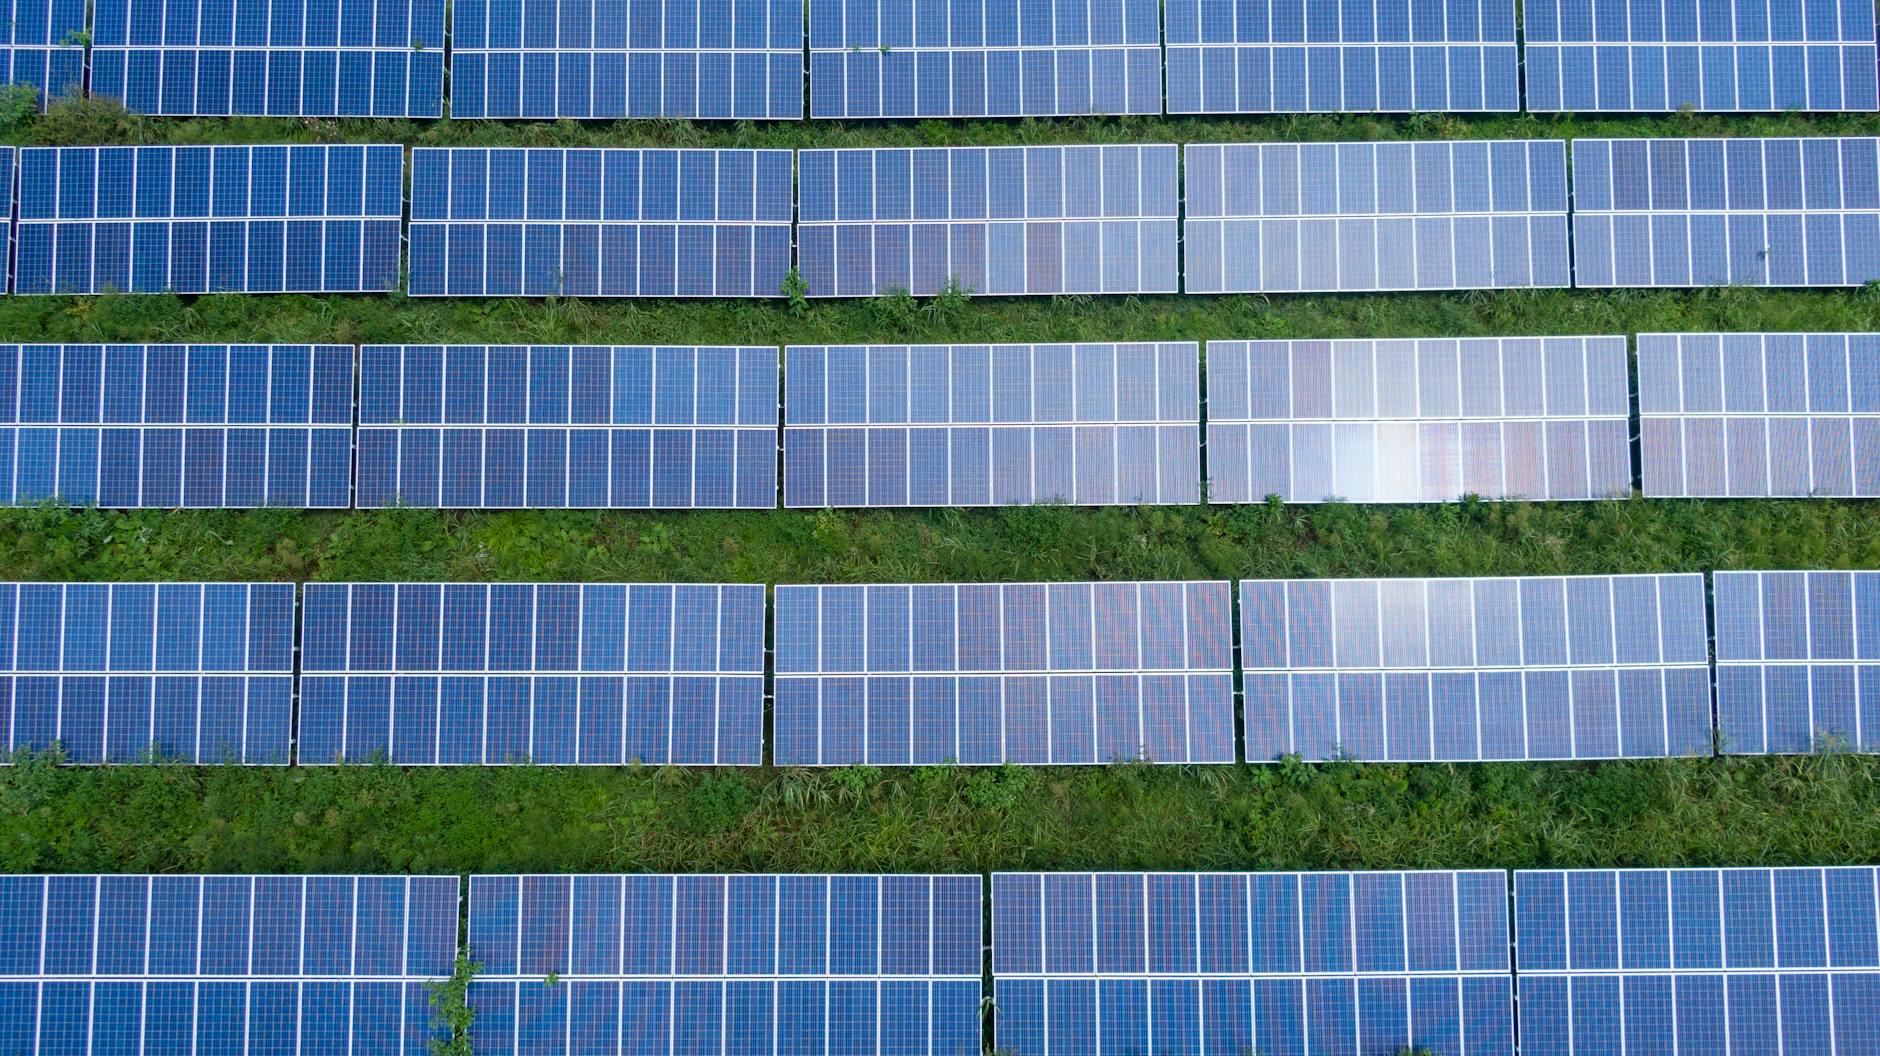 New UK gov't approves 3 huge solar farms & wants to expand rooftop installs